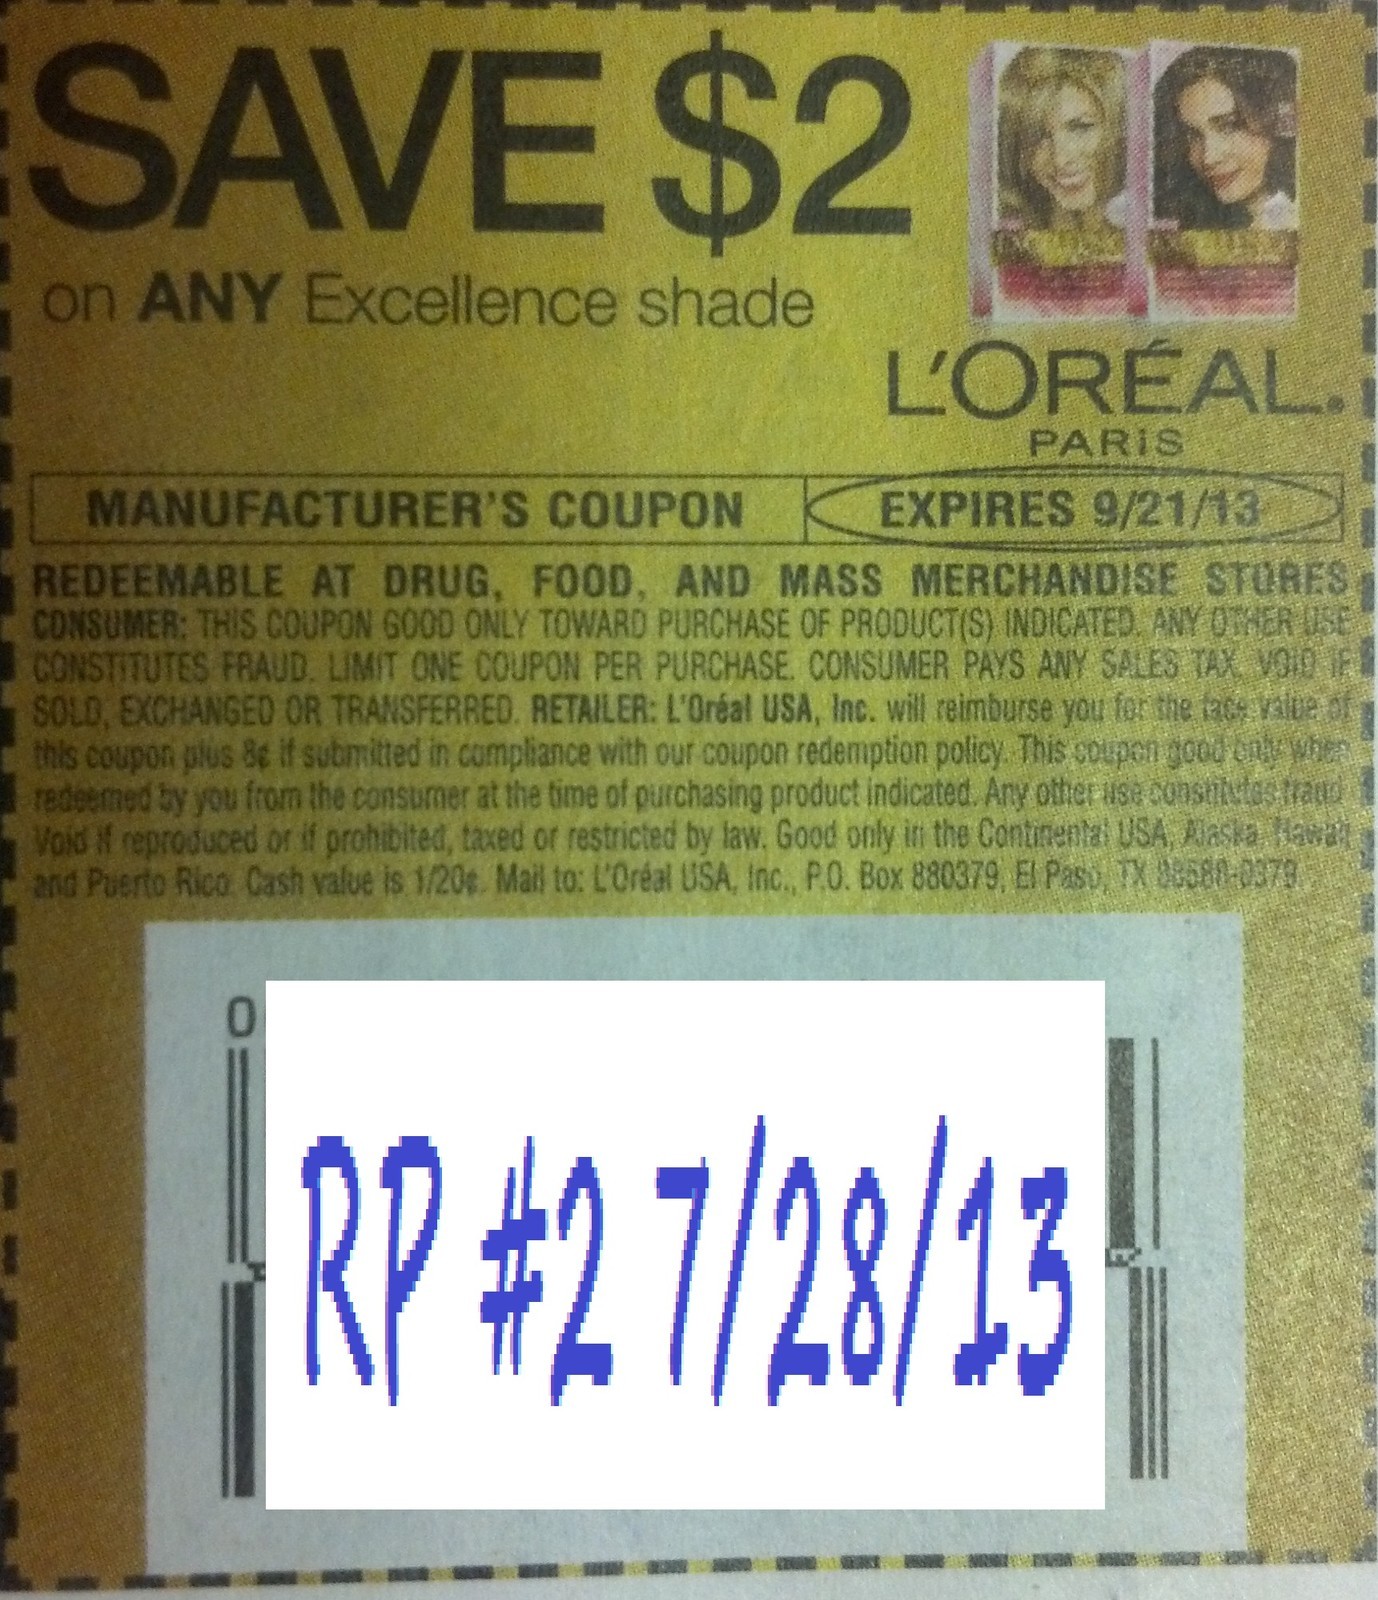 Save $2.00 on any L'Oreal Paris Excellence shade Expires 09/21/2013